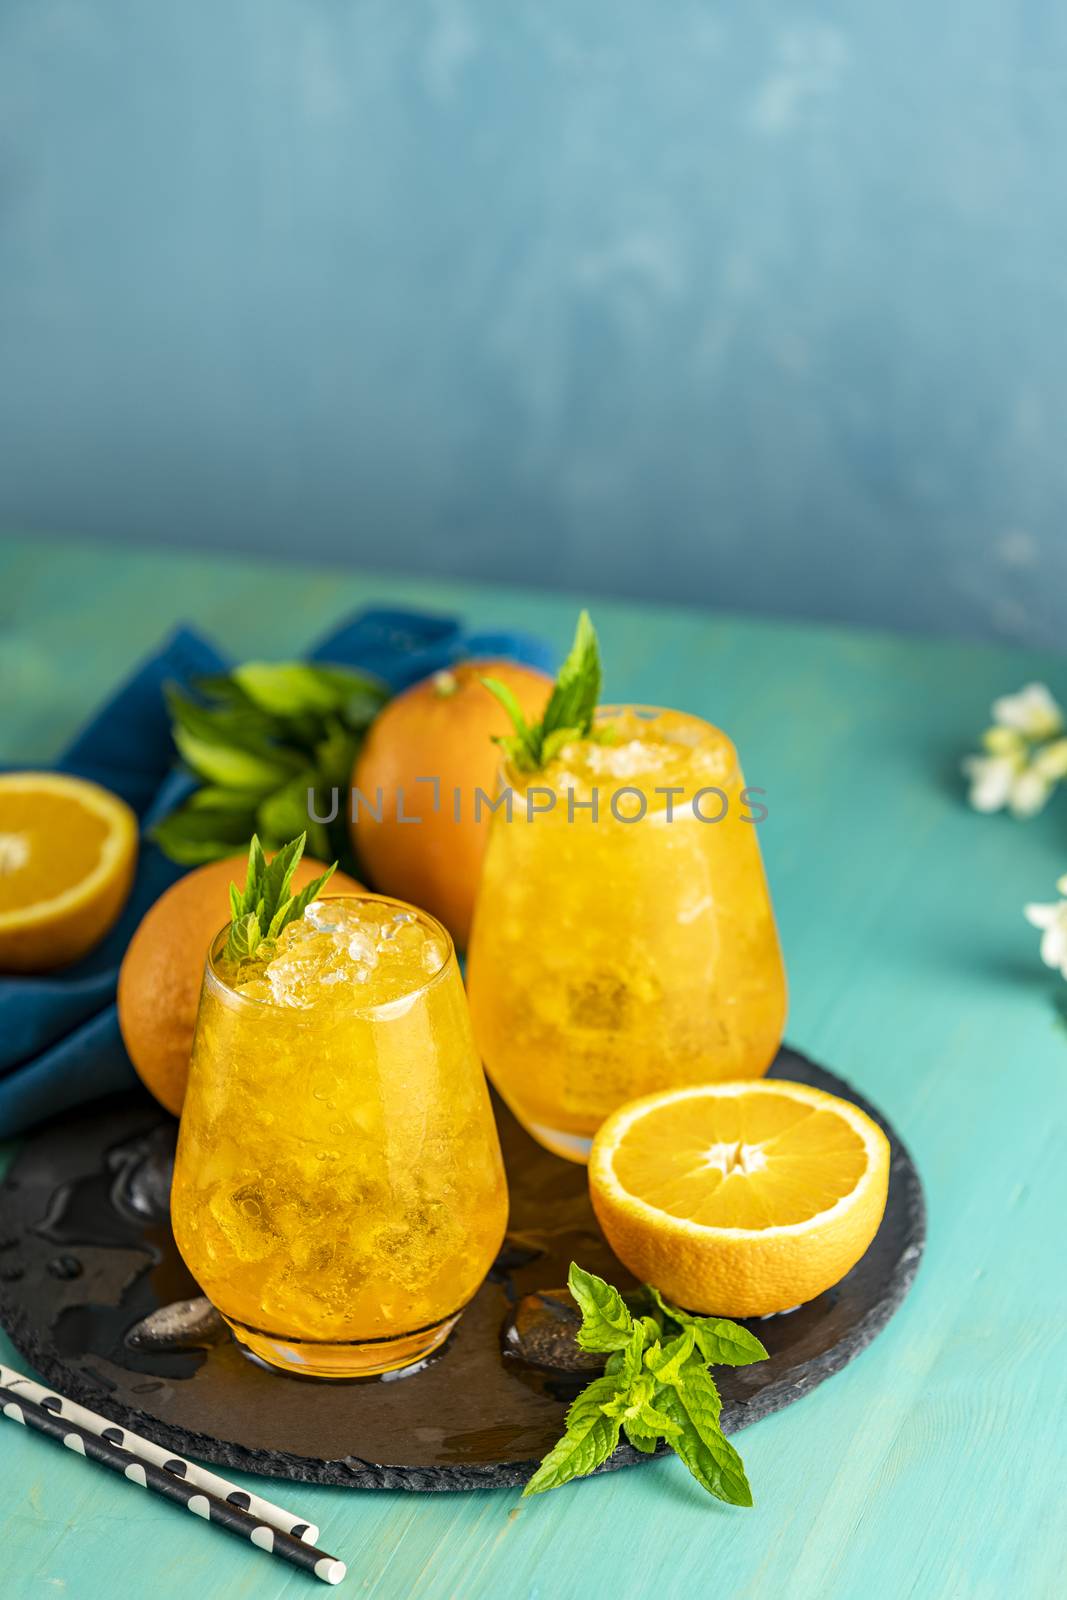 Orange drink with ice. Two glass of orange ice drink with fresh mint on wooden turquoise table surface. Alcoholic nonalcoholic summer fresh drink beverage